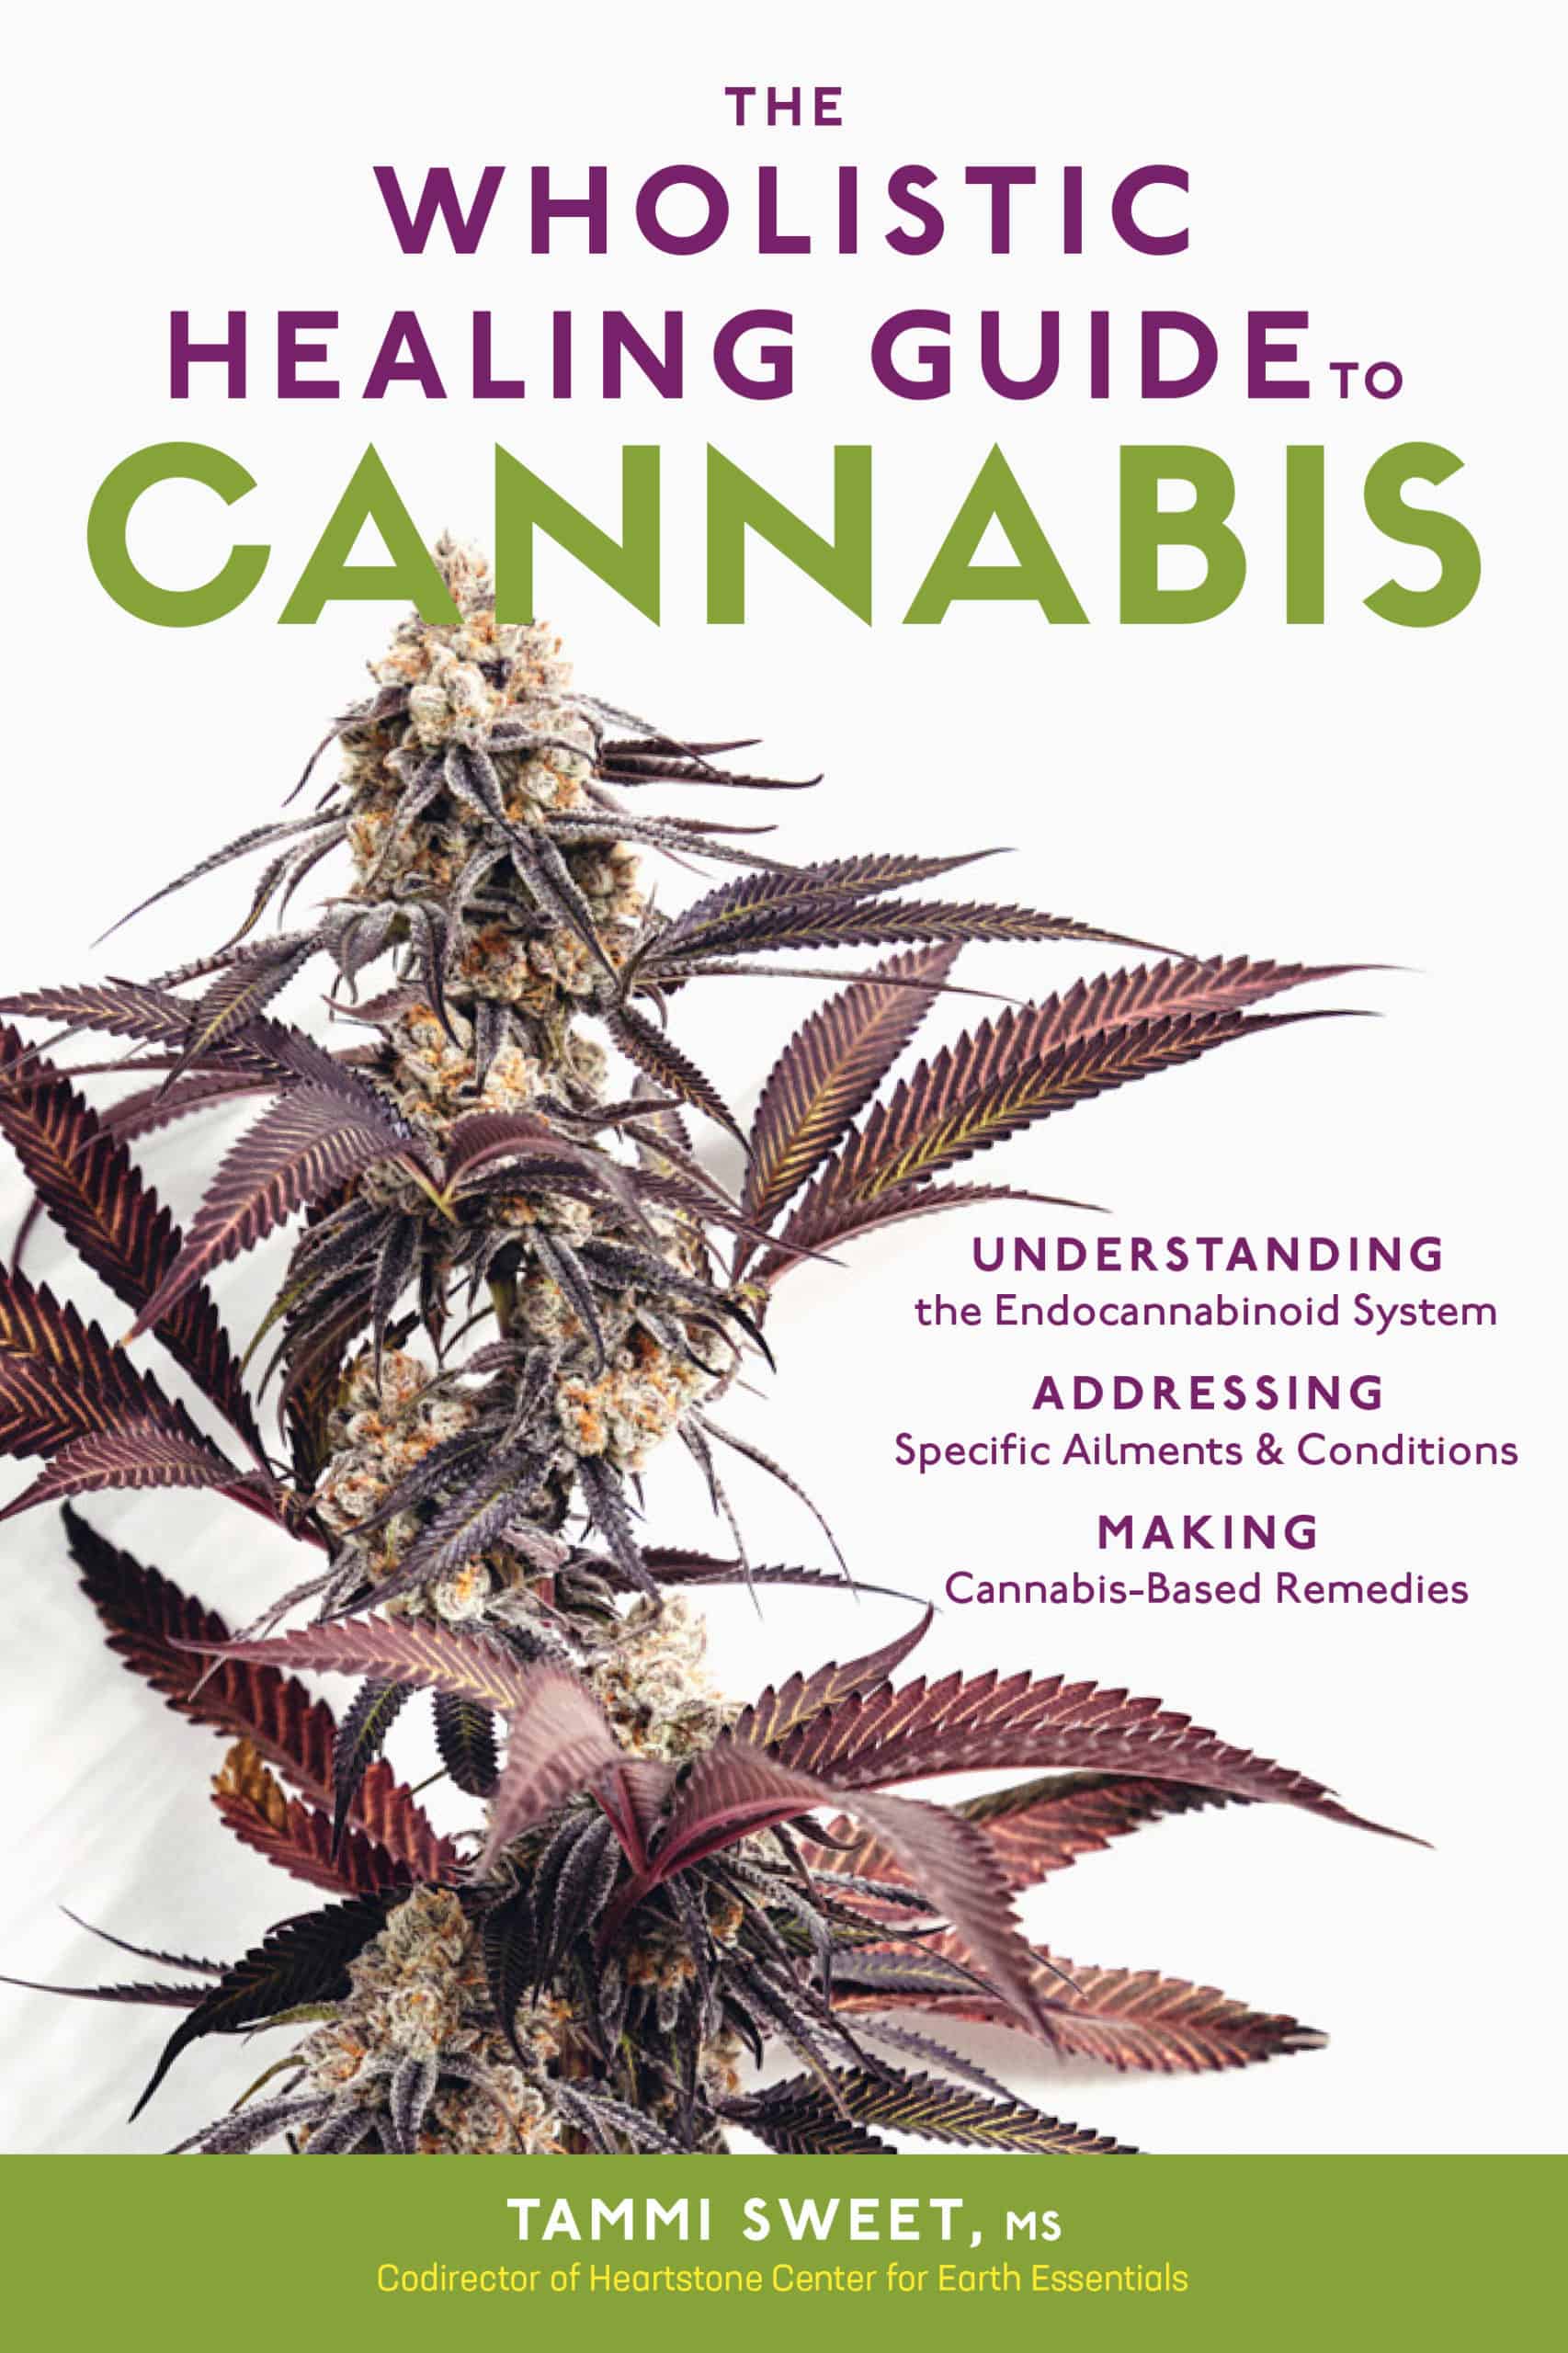 https://www.heart-stone.com/wp-content/uploads/2020/01/wholistic-guide-to-cannabis-book-cover-scaled.jpg